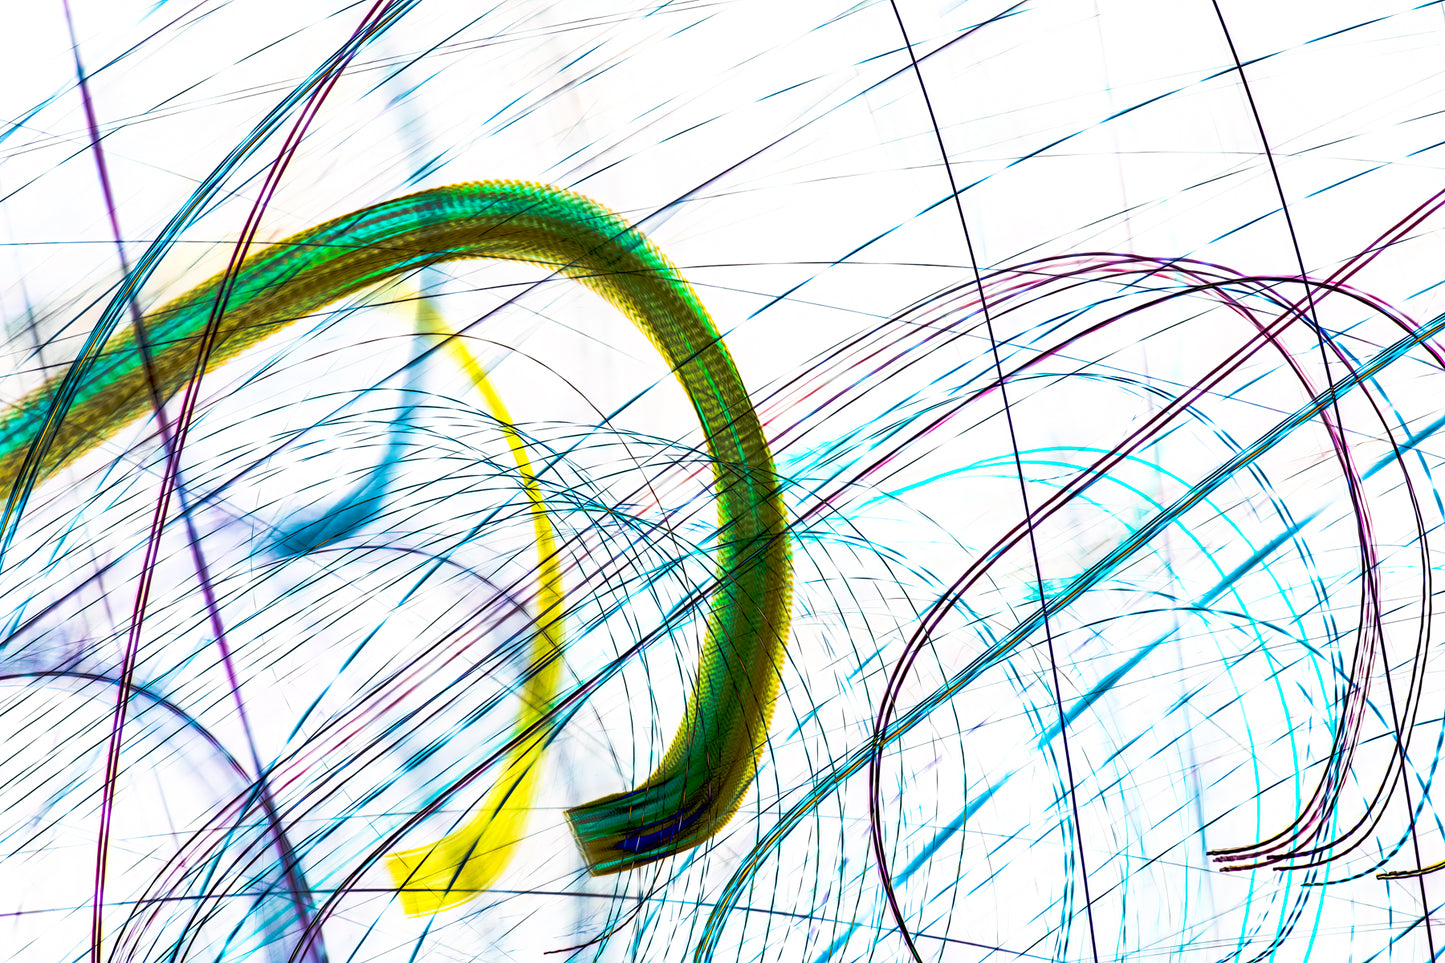 "Rolling Through Some Lively Loops" photo art print